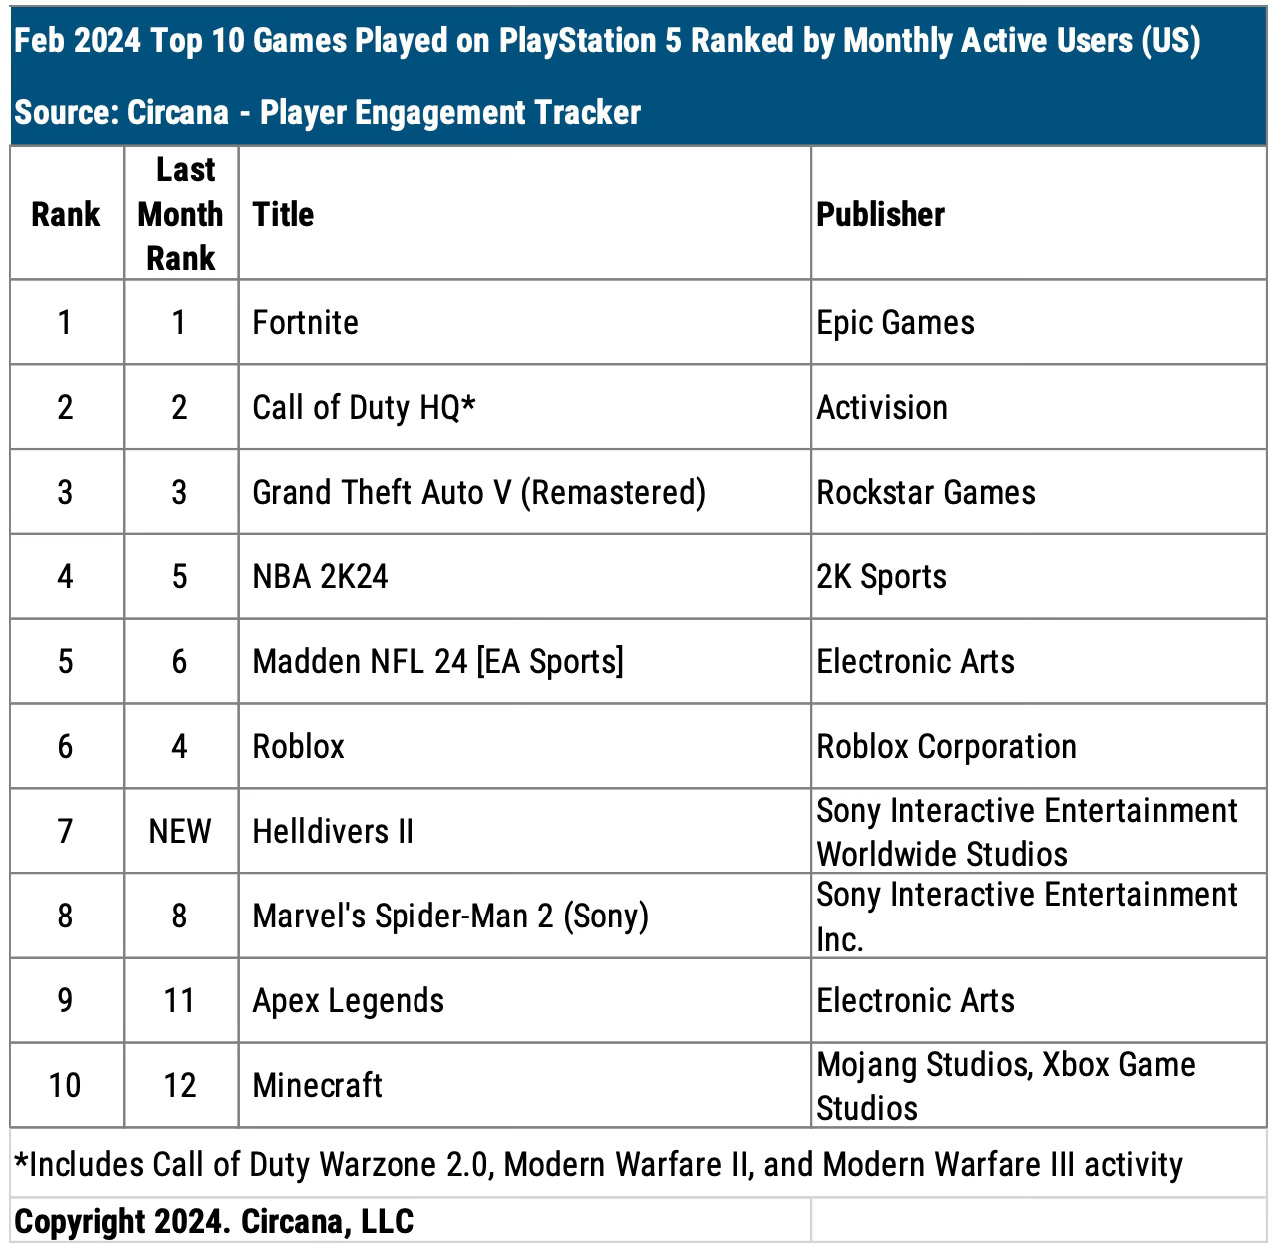 Chart showing the top 10 most-played games on PlayStation 5 in the U.S. in February 2024 ranked by monthly active users